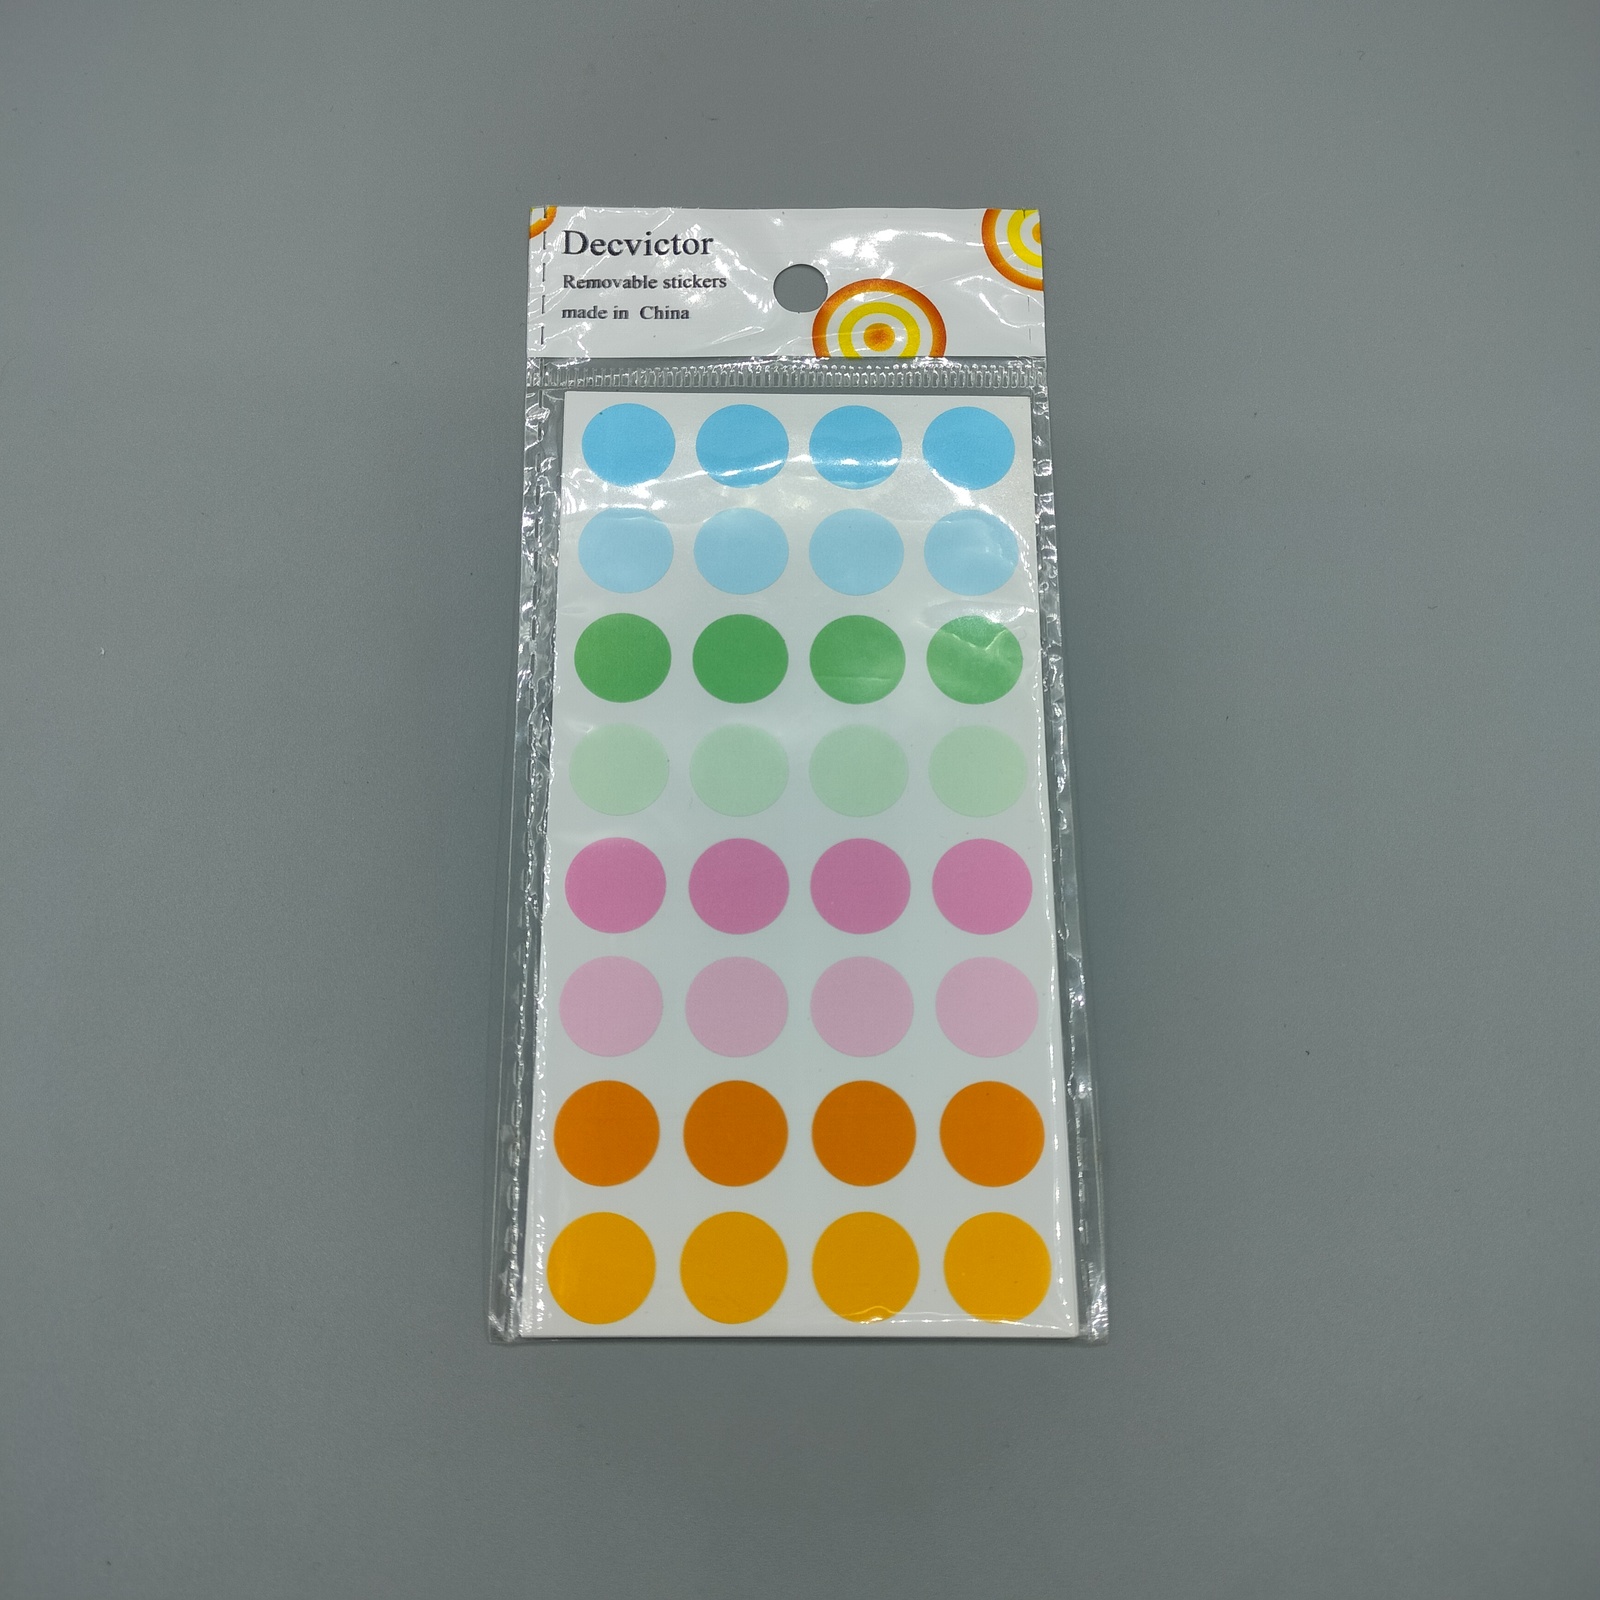 Primary image for Decvictor Removable stickers Convenient Removable Assorted Colors Coding Labels